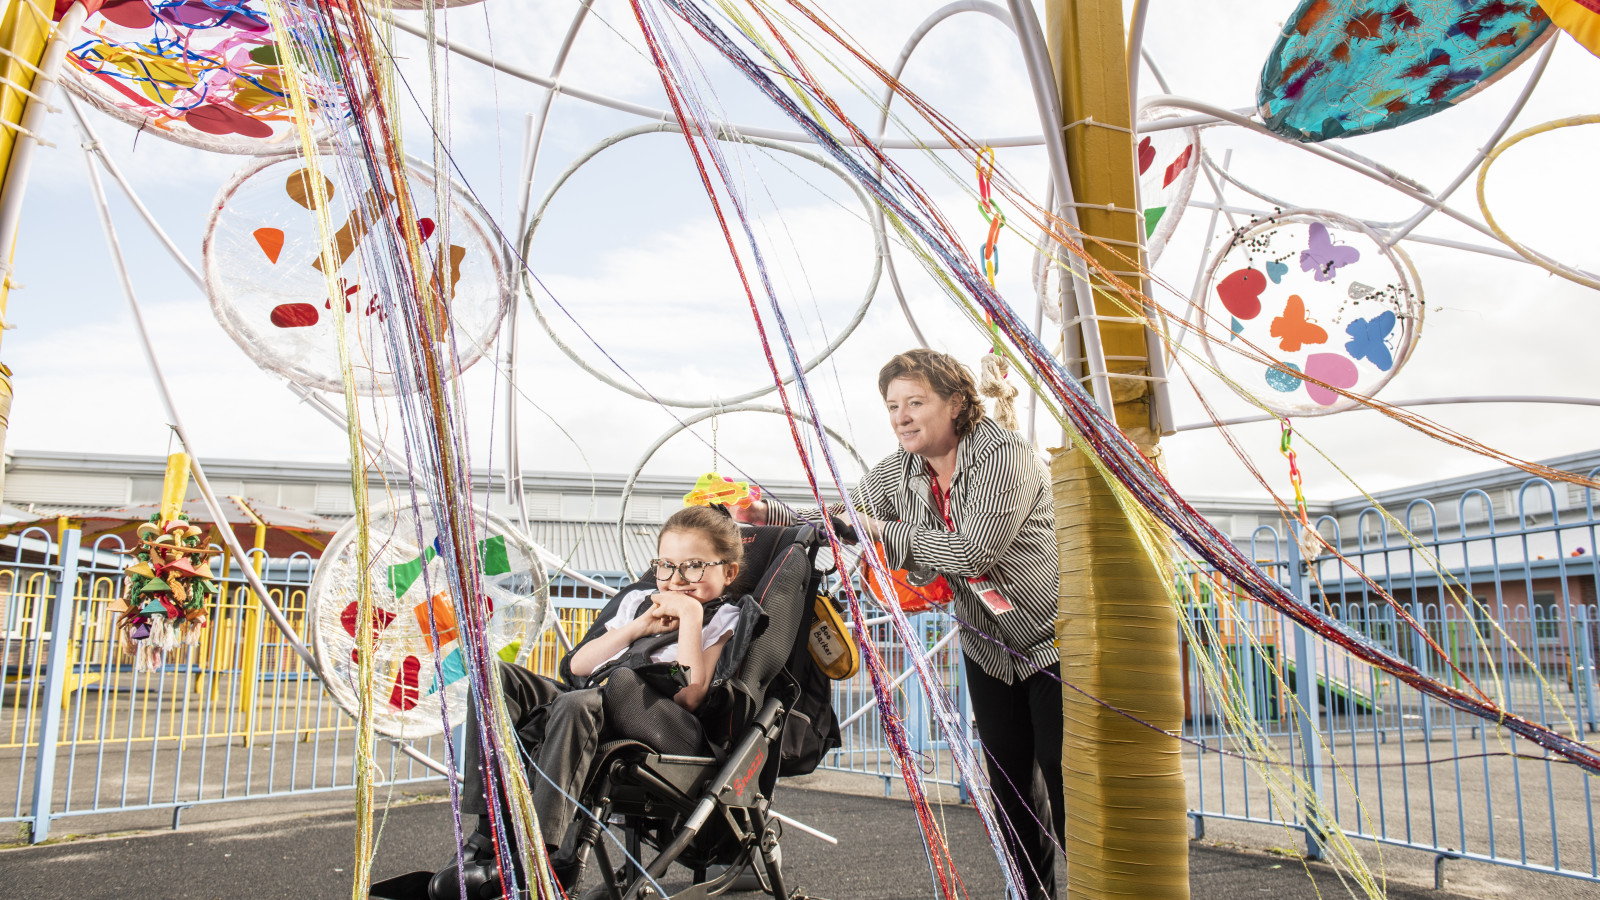 A woman in a stripy shirt is pushing a small girl in a wheelchair underneath a brightly coloured artwork made of streamers and hula hoops in a playground. The woman is smiling and the young girl is grinning.